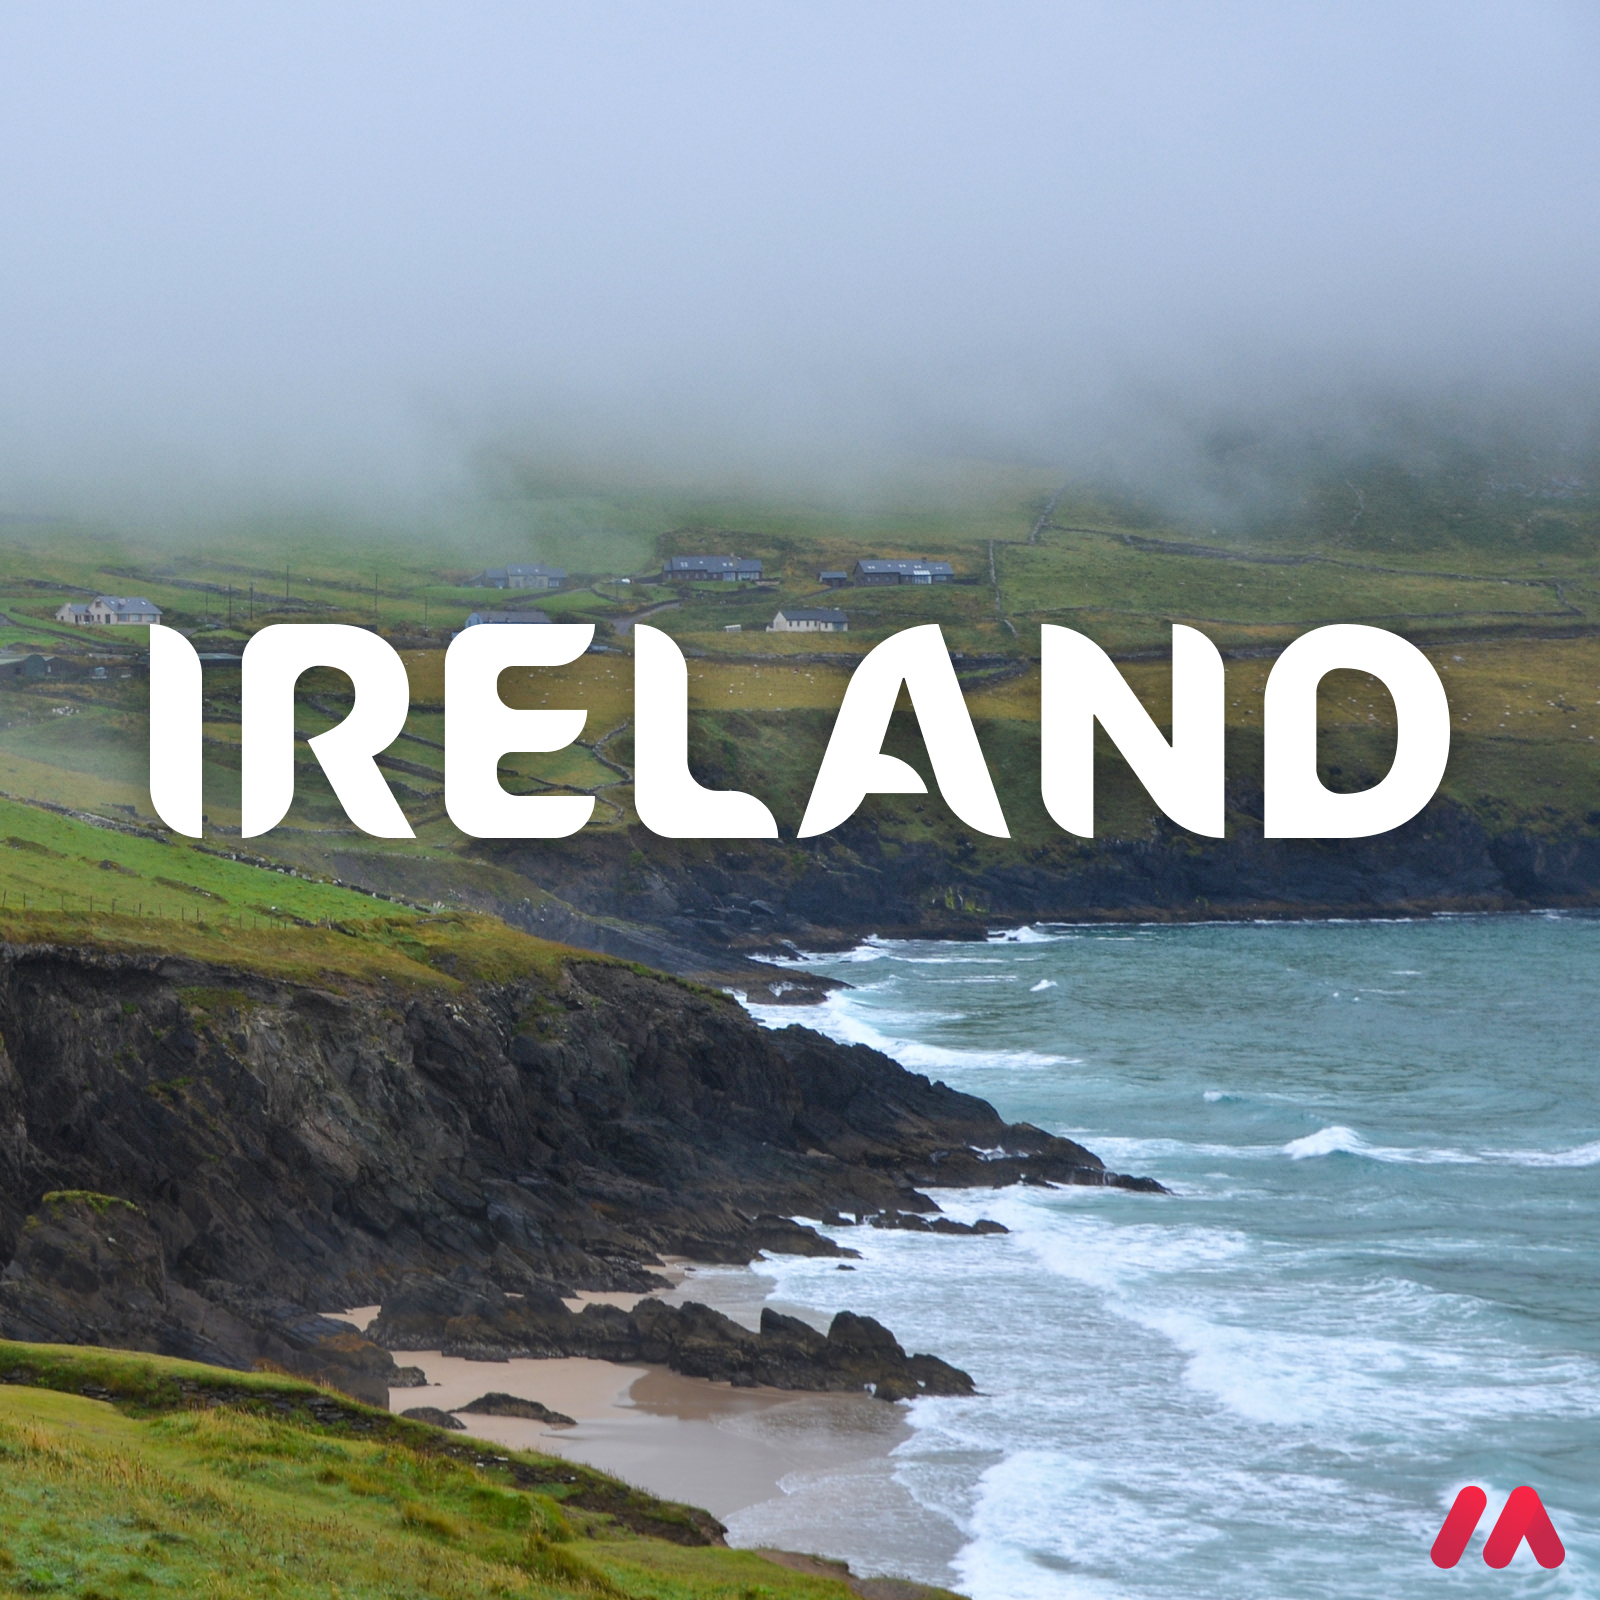 Coastal landscape in Ireland with rugged cliffs and misty hills in the background. The text 'Ireland' is prominently displayed in the foreground.